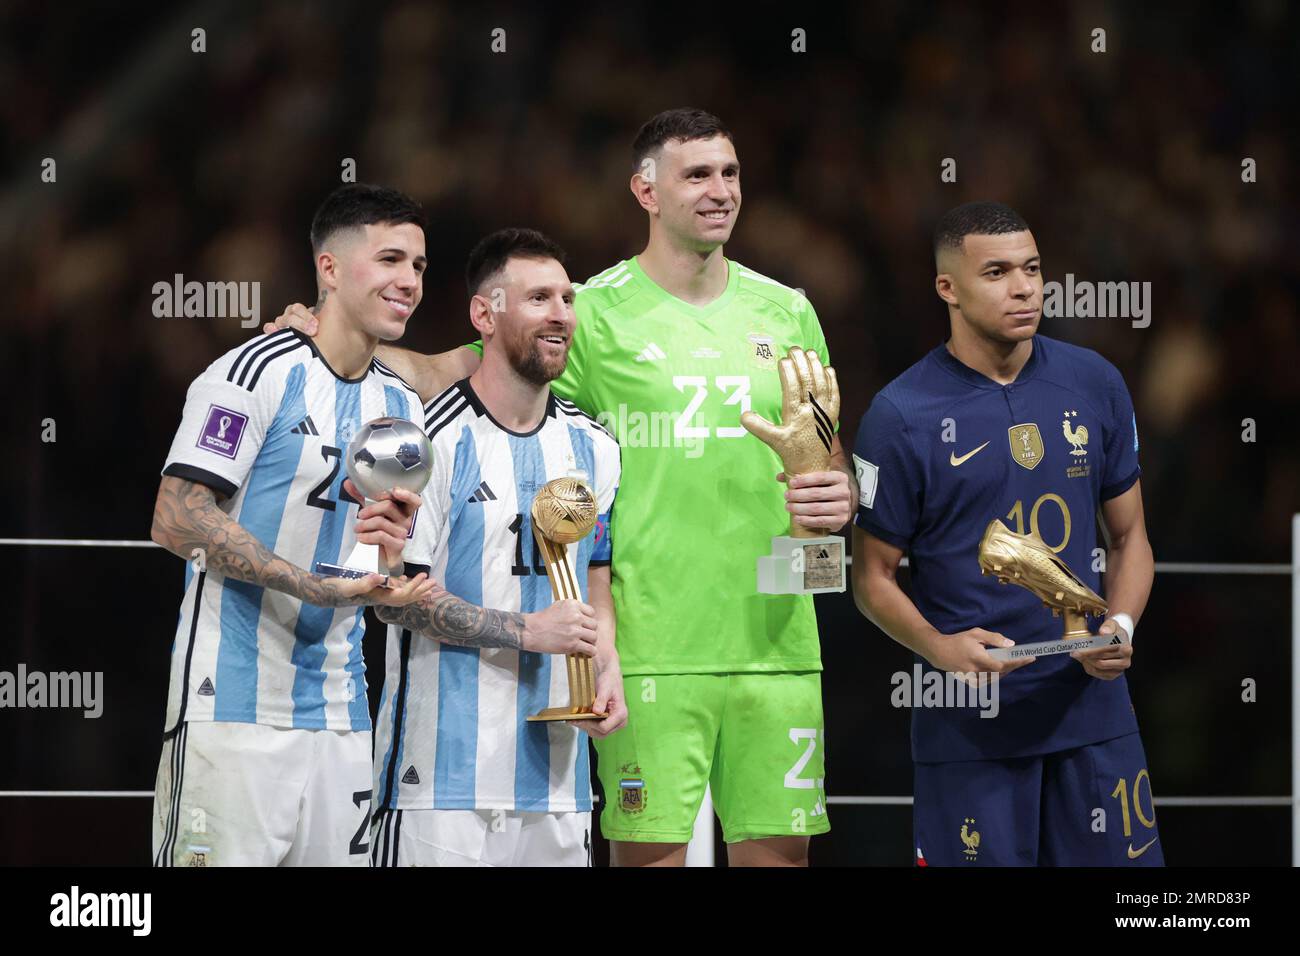 Enzo Fernandez, Lionel Messi, Emiliano Martinez (Argentina), Kylian Mbappe (France) are seen with trophies during the FIFA World Cup Qatar 2022 Final match between Argentina and France at Lusail Stadium. Final score: Argentina 3:3 (penalty 4:2) France. Stock Photo